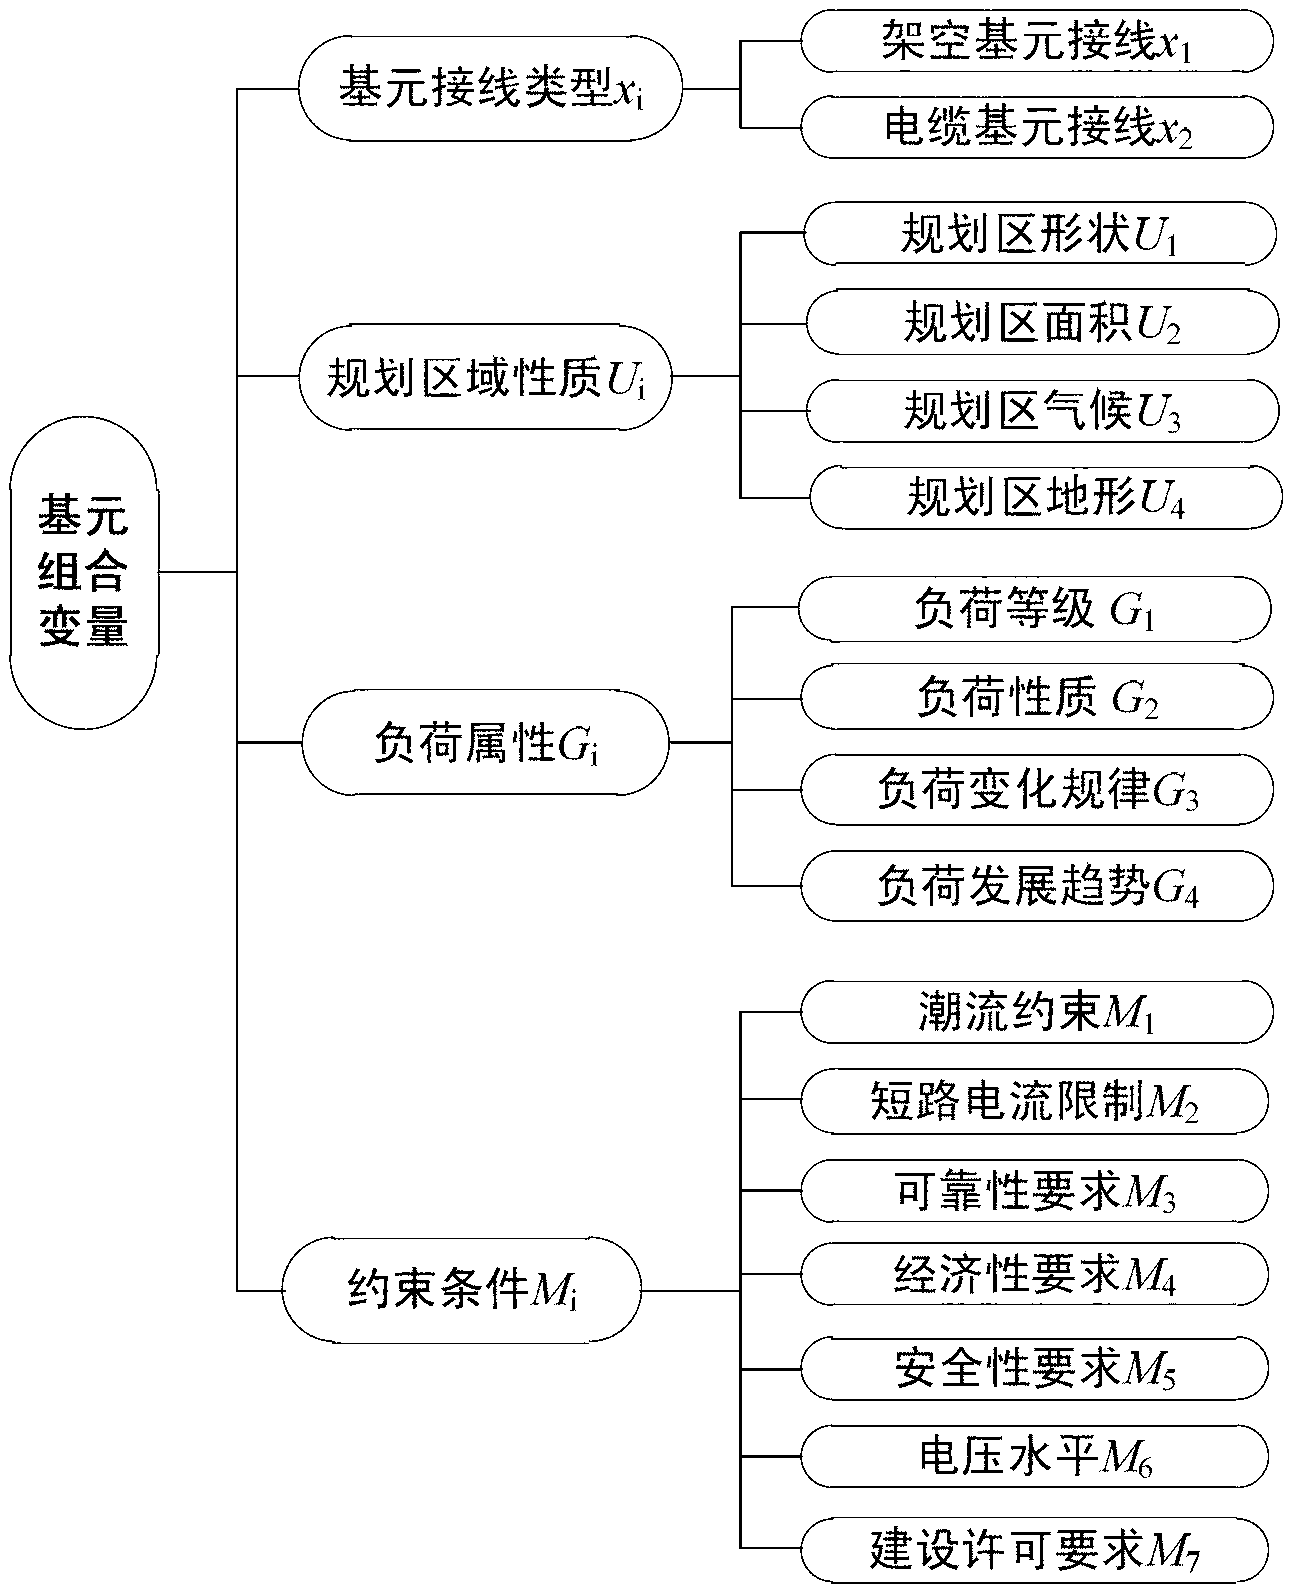 Distribution network connection method